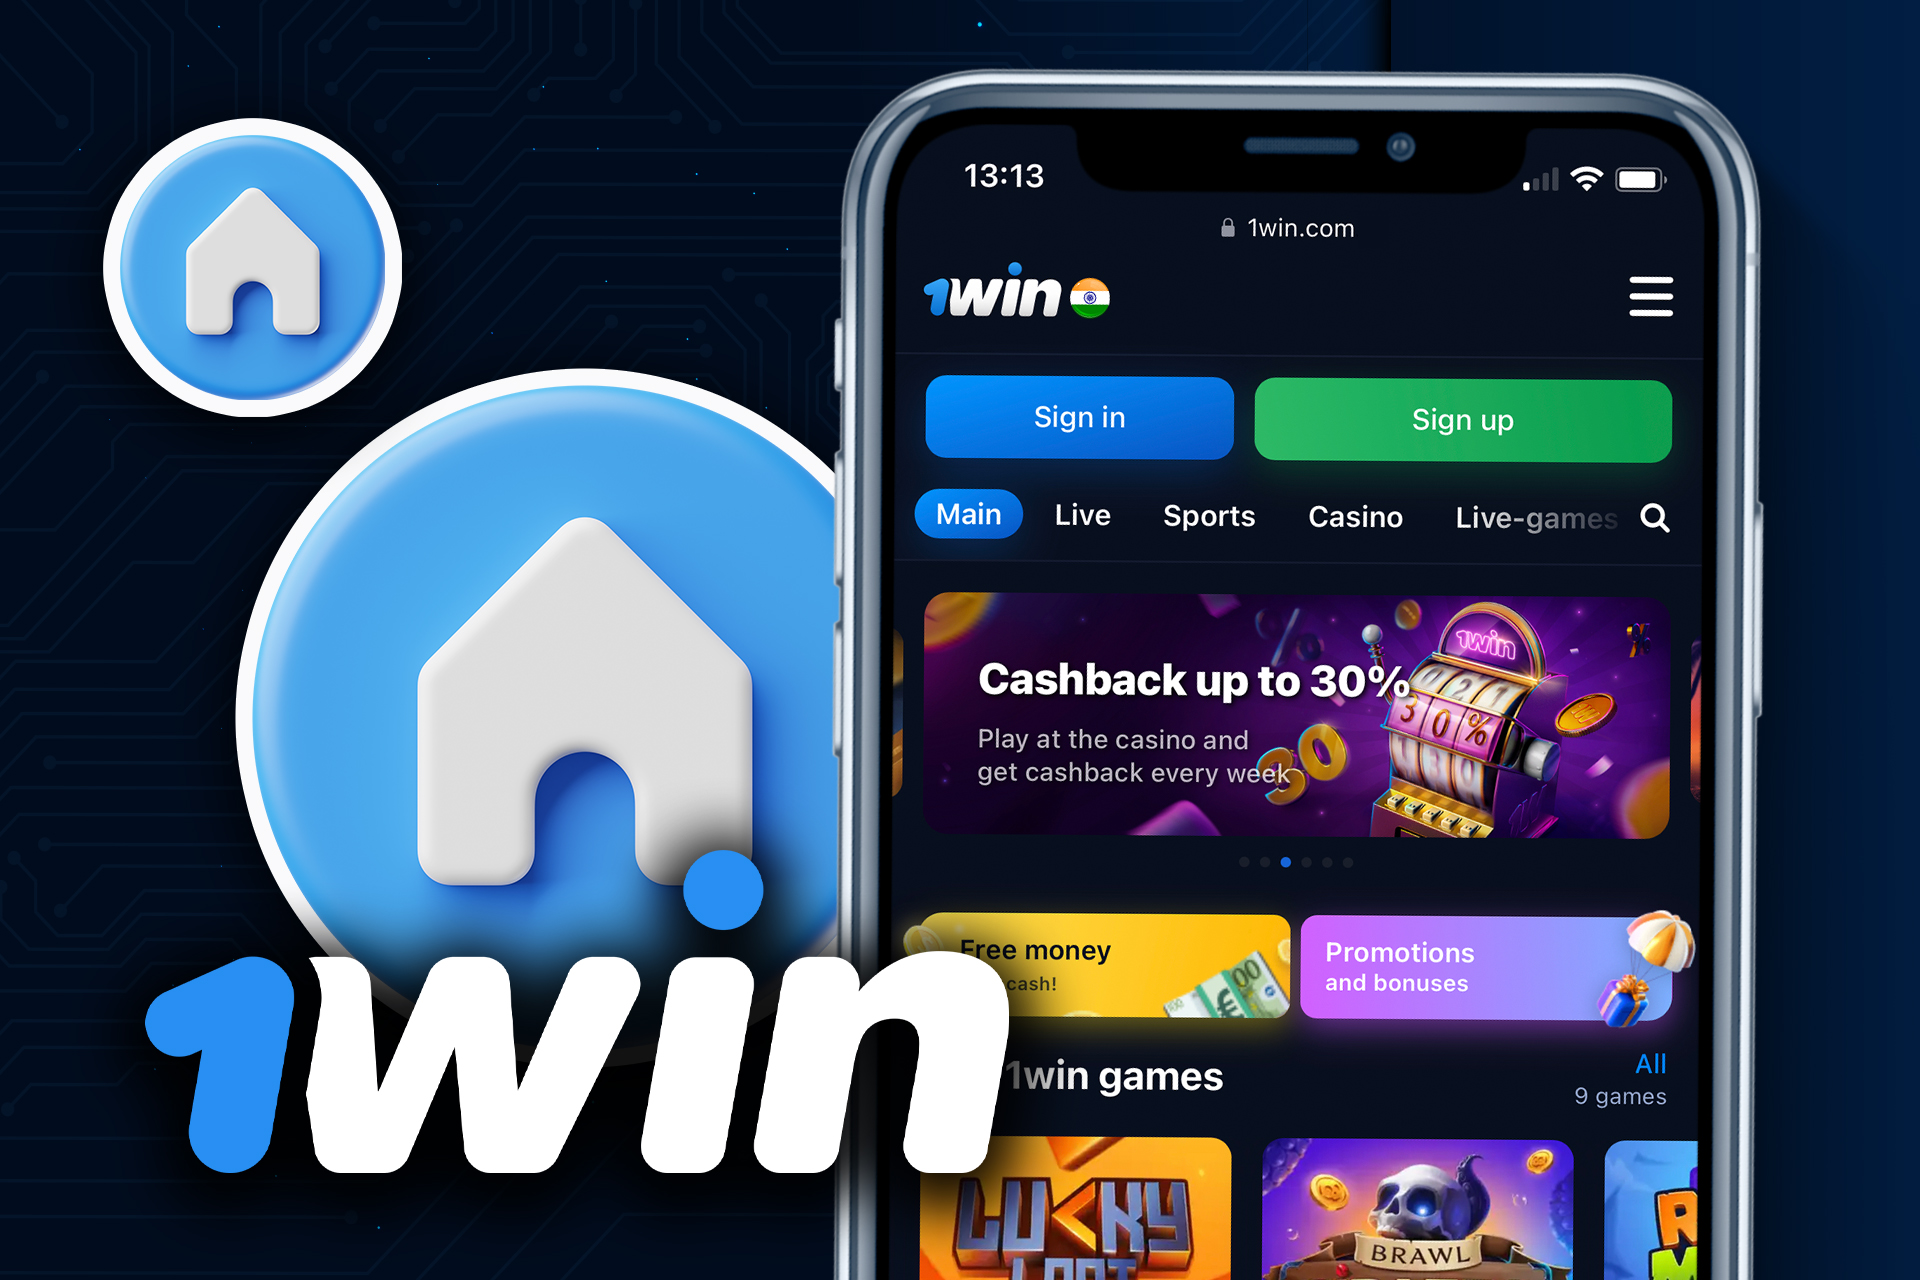 You don't have to download the app, while you can bet via the mobile version of 1win website.